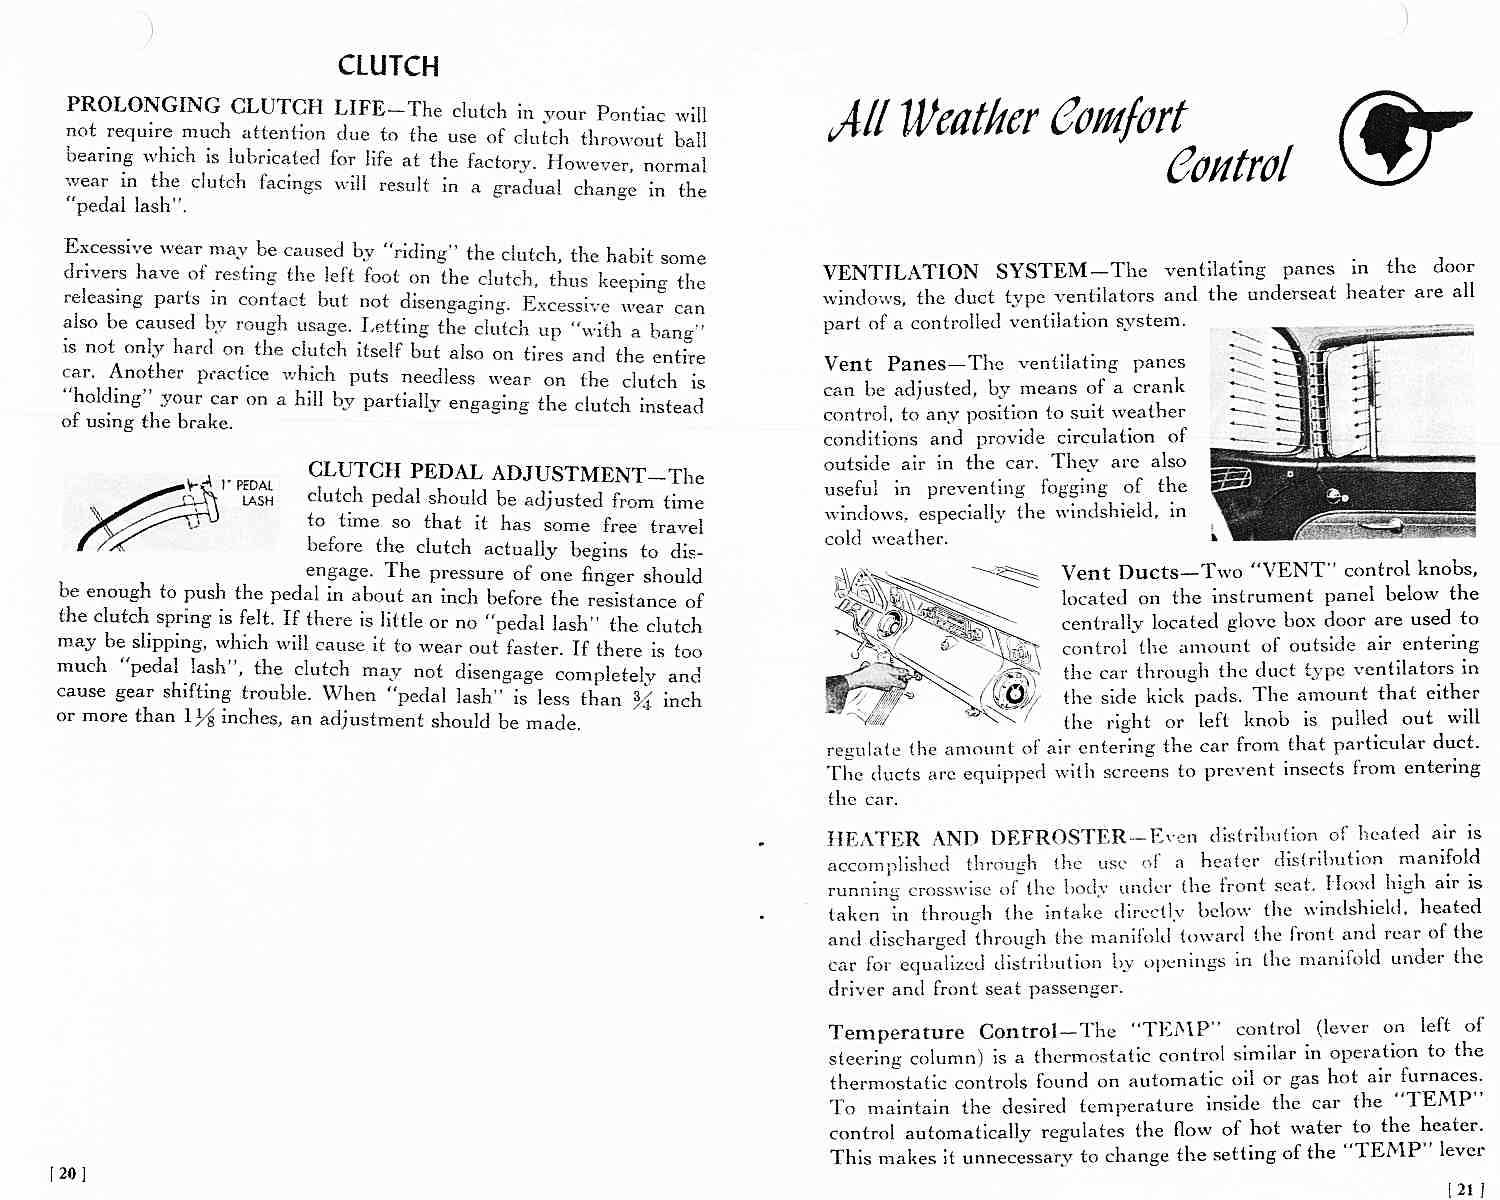 1956_Pontiac_Owners_Guide-20-21